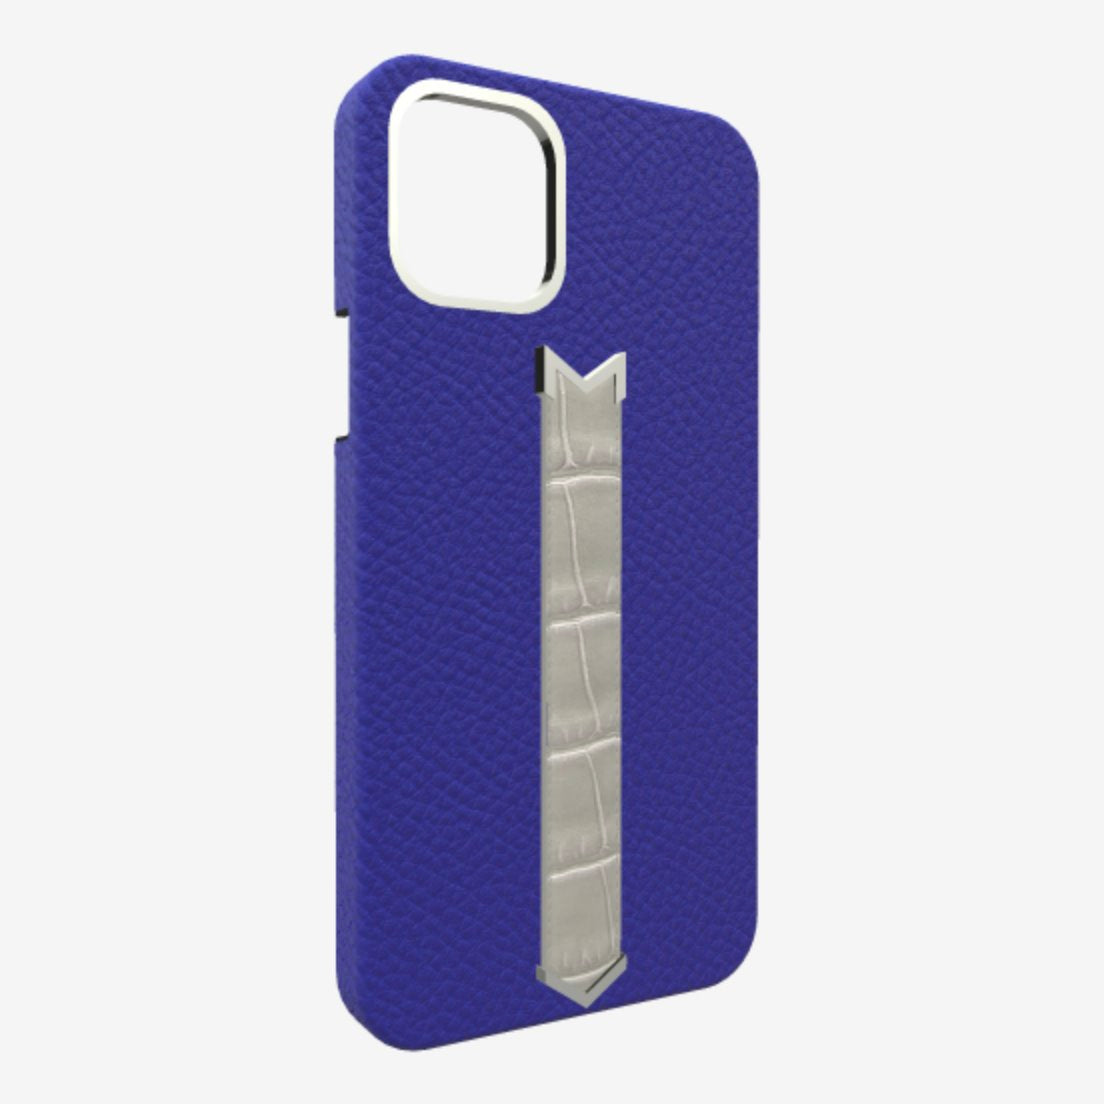 Silver Finger Strap Case for iPhone 13 Pro in Genuine Calfskin and Alligator Electric-Blue Pearl-Grey 